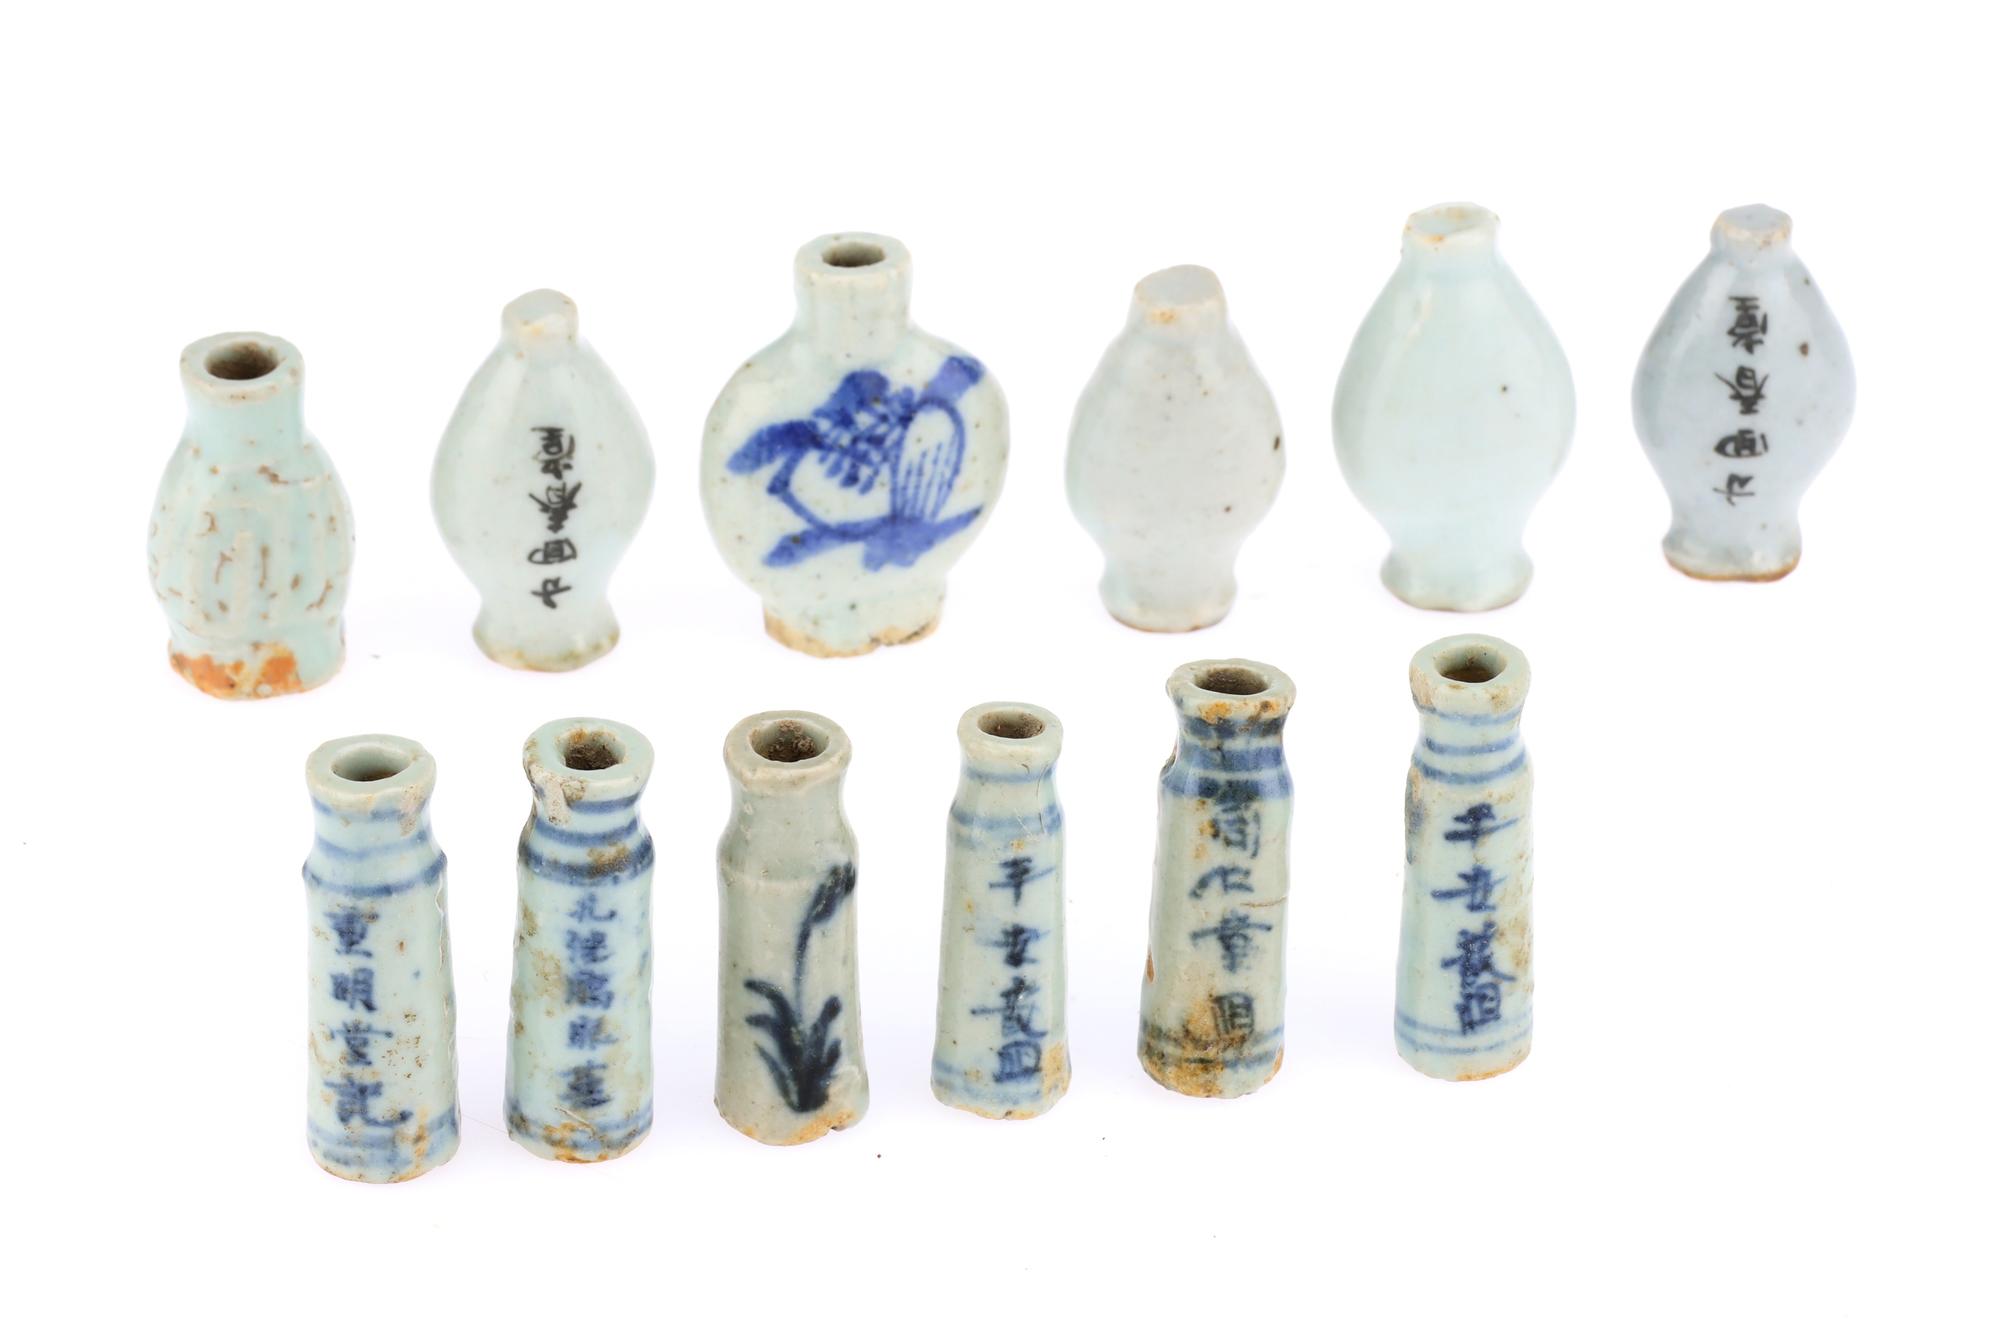 12 white antique chinese single dose medicine bottles with ovoid or straight bodies. Chinese characters are written on some bottles with blue underglaze and 2 bottles depict birds and plants. 